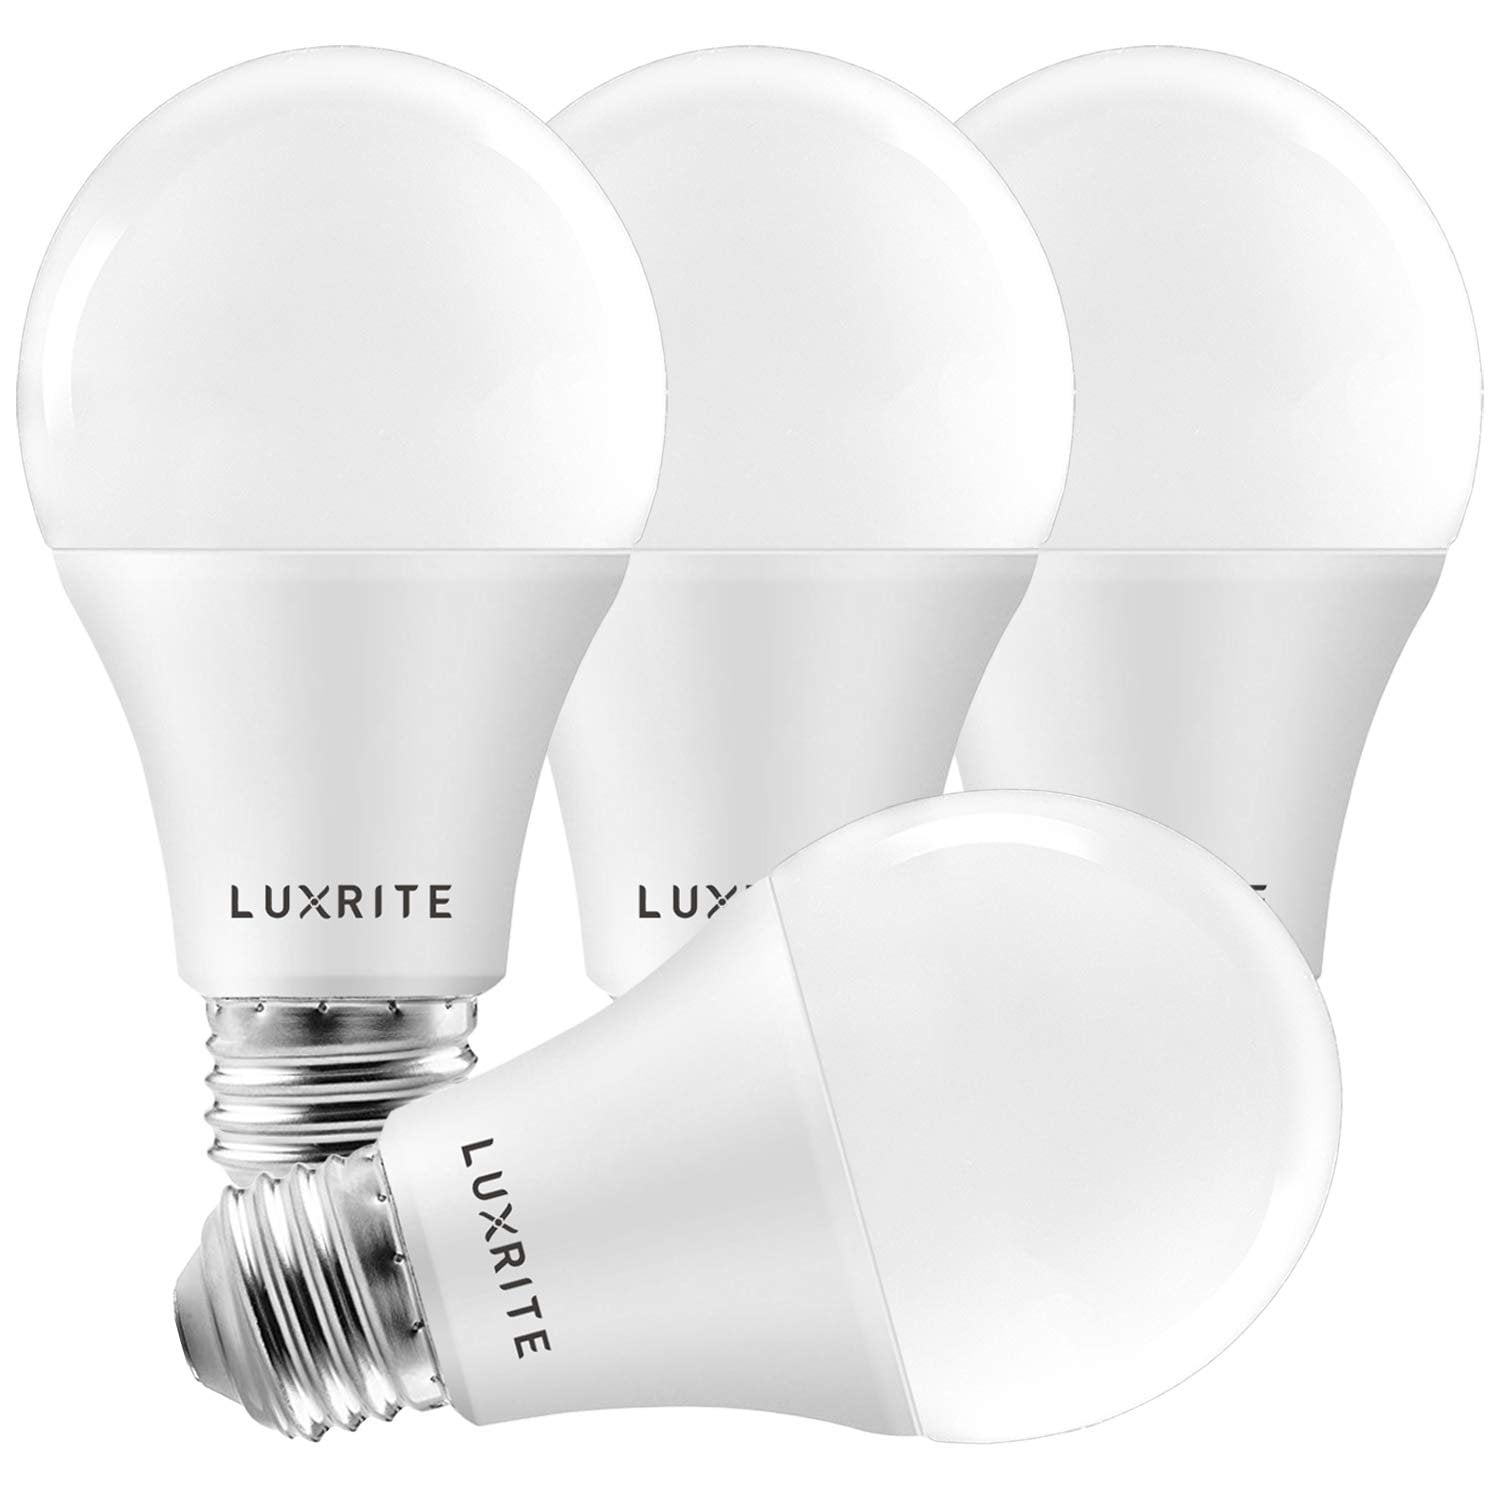 Damp Rated 4000K Cool White Luxrite A19 LED GU24 Light Bulb UL Listed 800 Lumens Dimmable Twist Lock Light Bulbs 16 Pack 60W Equivalent GU24 Base Enclosed Fixture Rated